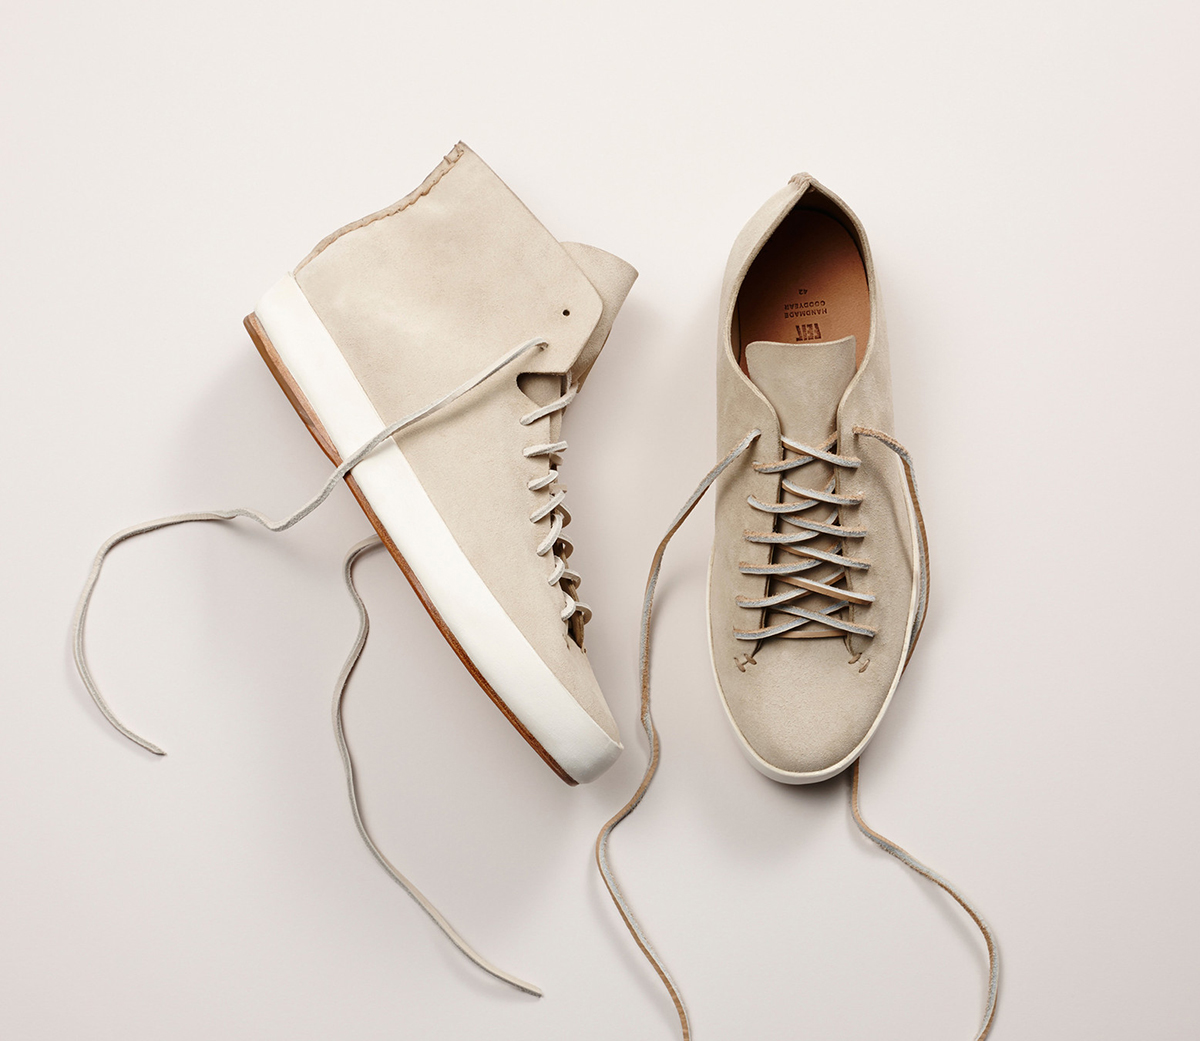  Feit Direct shoes Hand Sewn High 